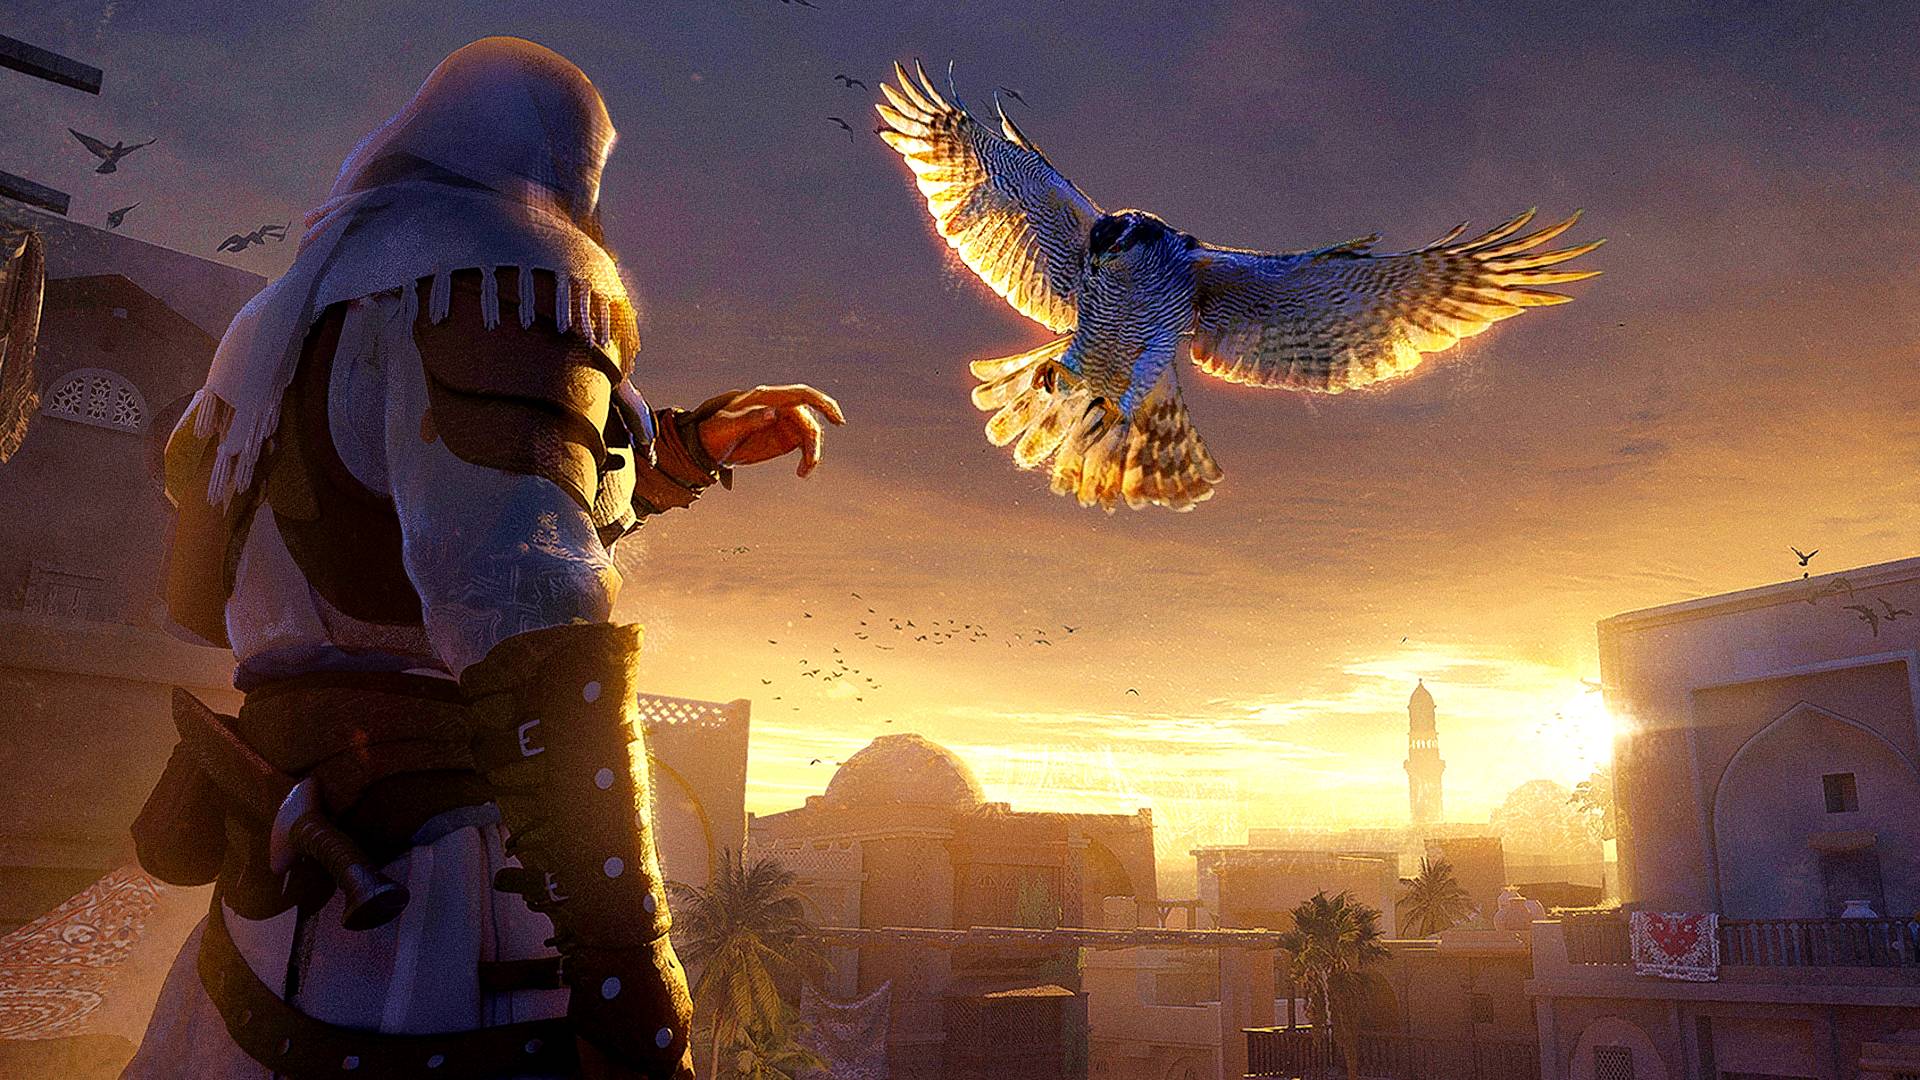 Assassin's Creed Mirage Review  Fly Like An Eagle - Prima Games